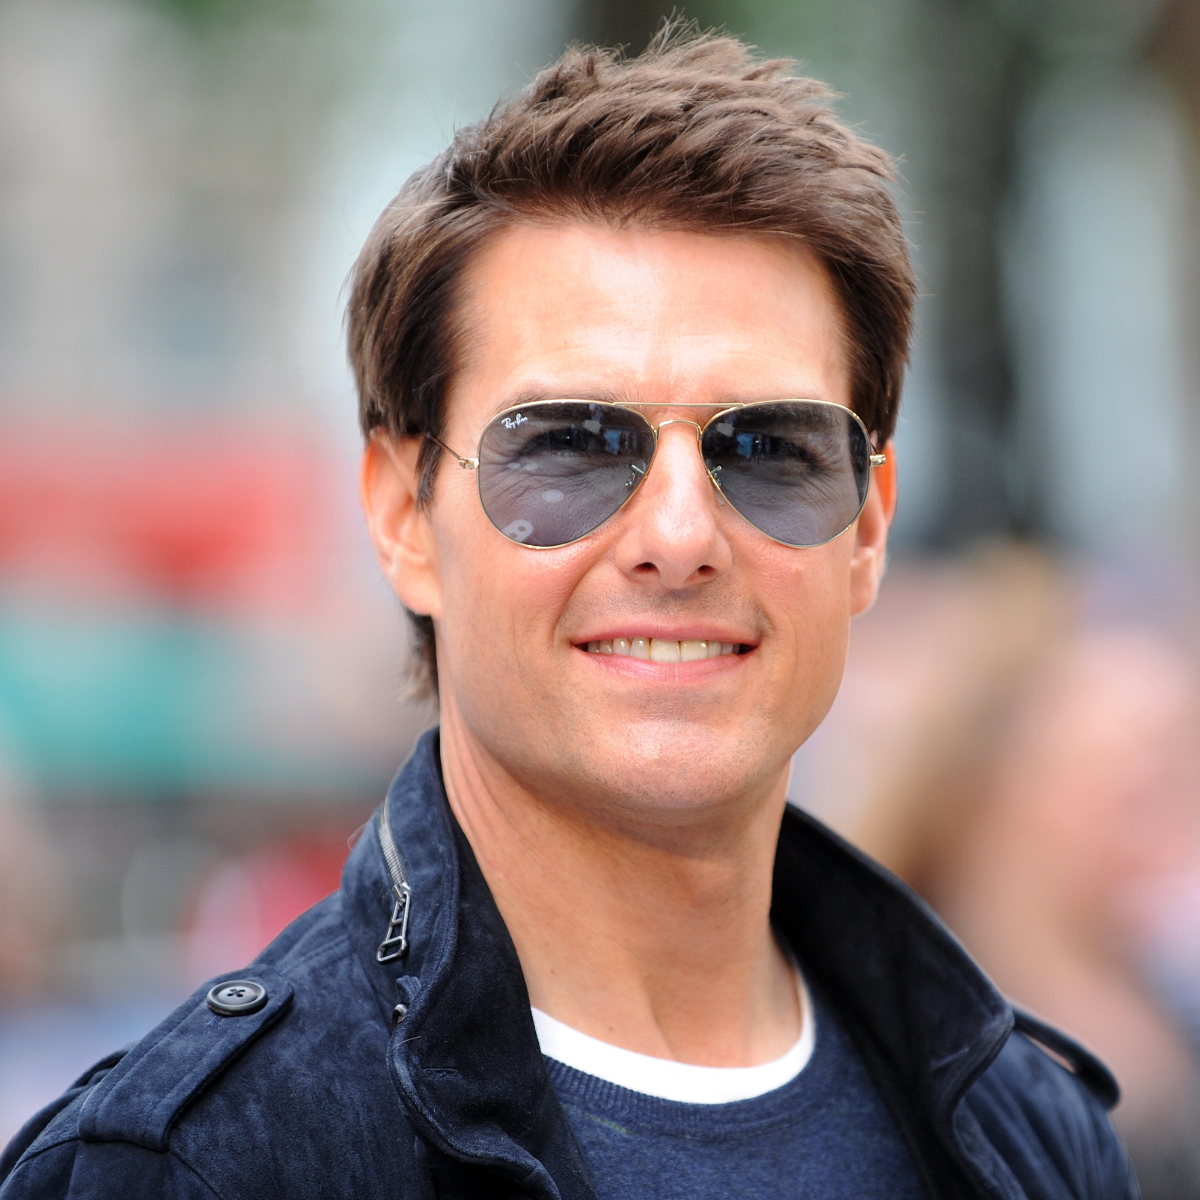 5 best action movies of Tom Cruise that you should definitely add ...